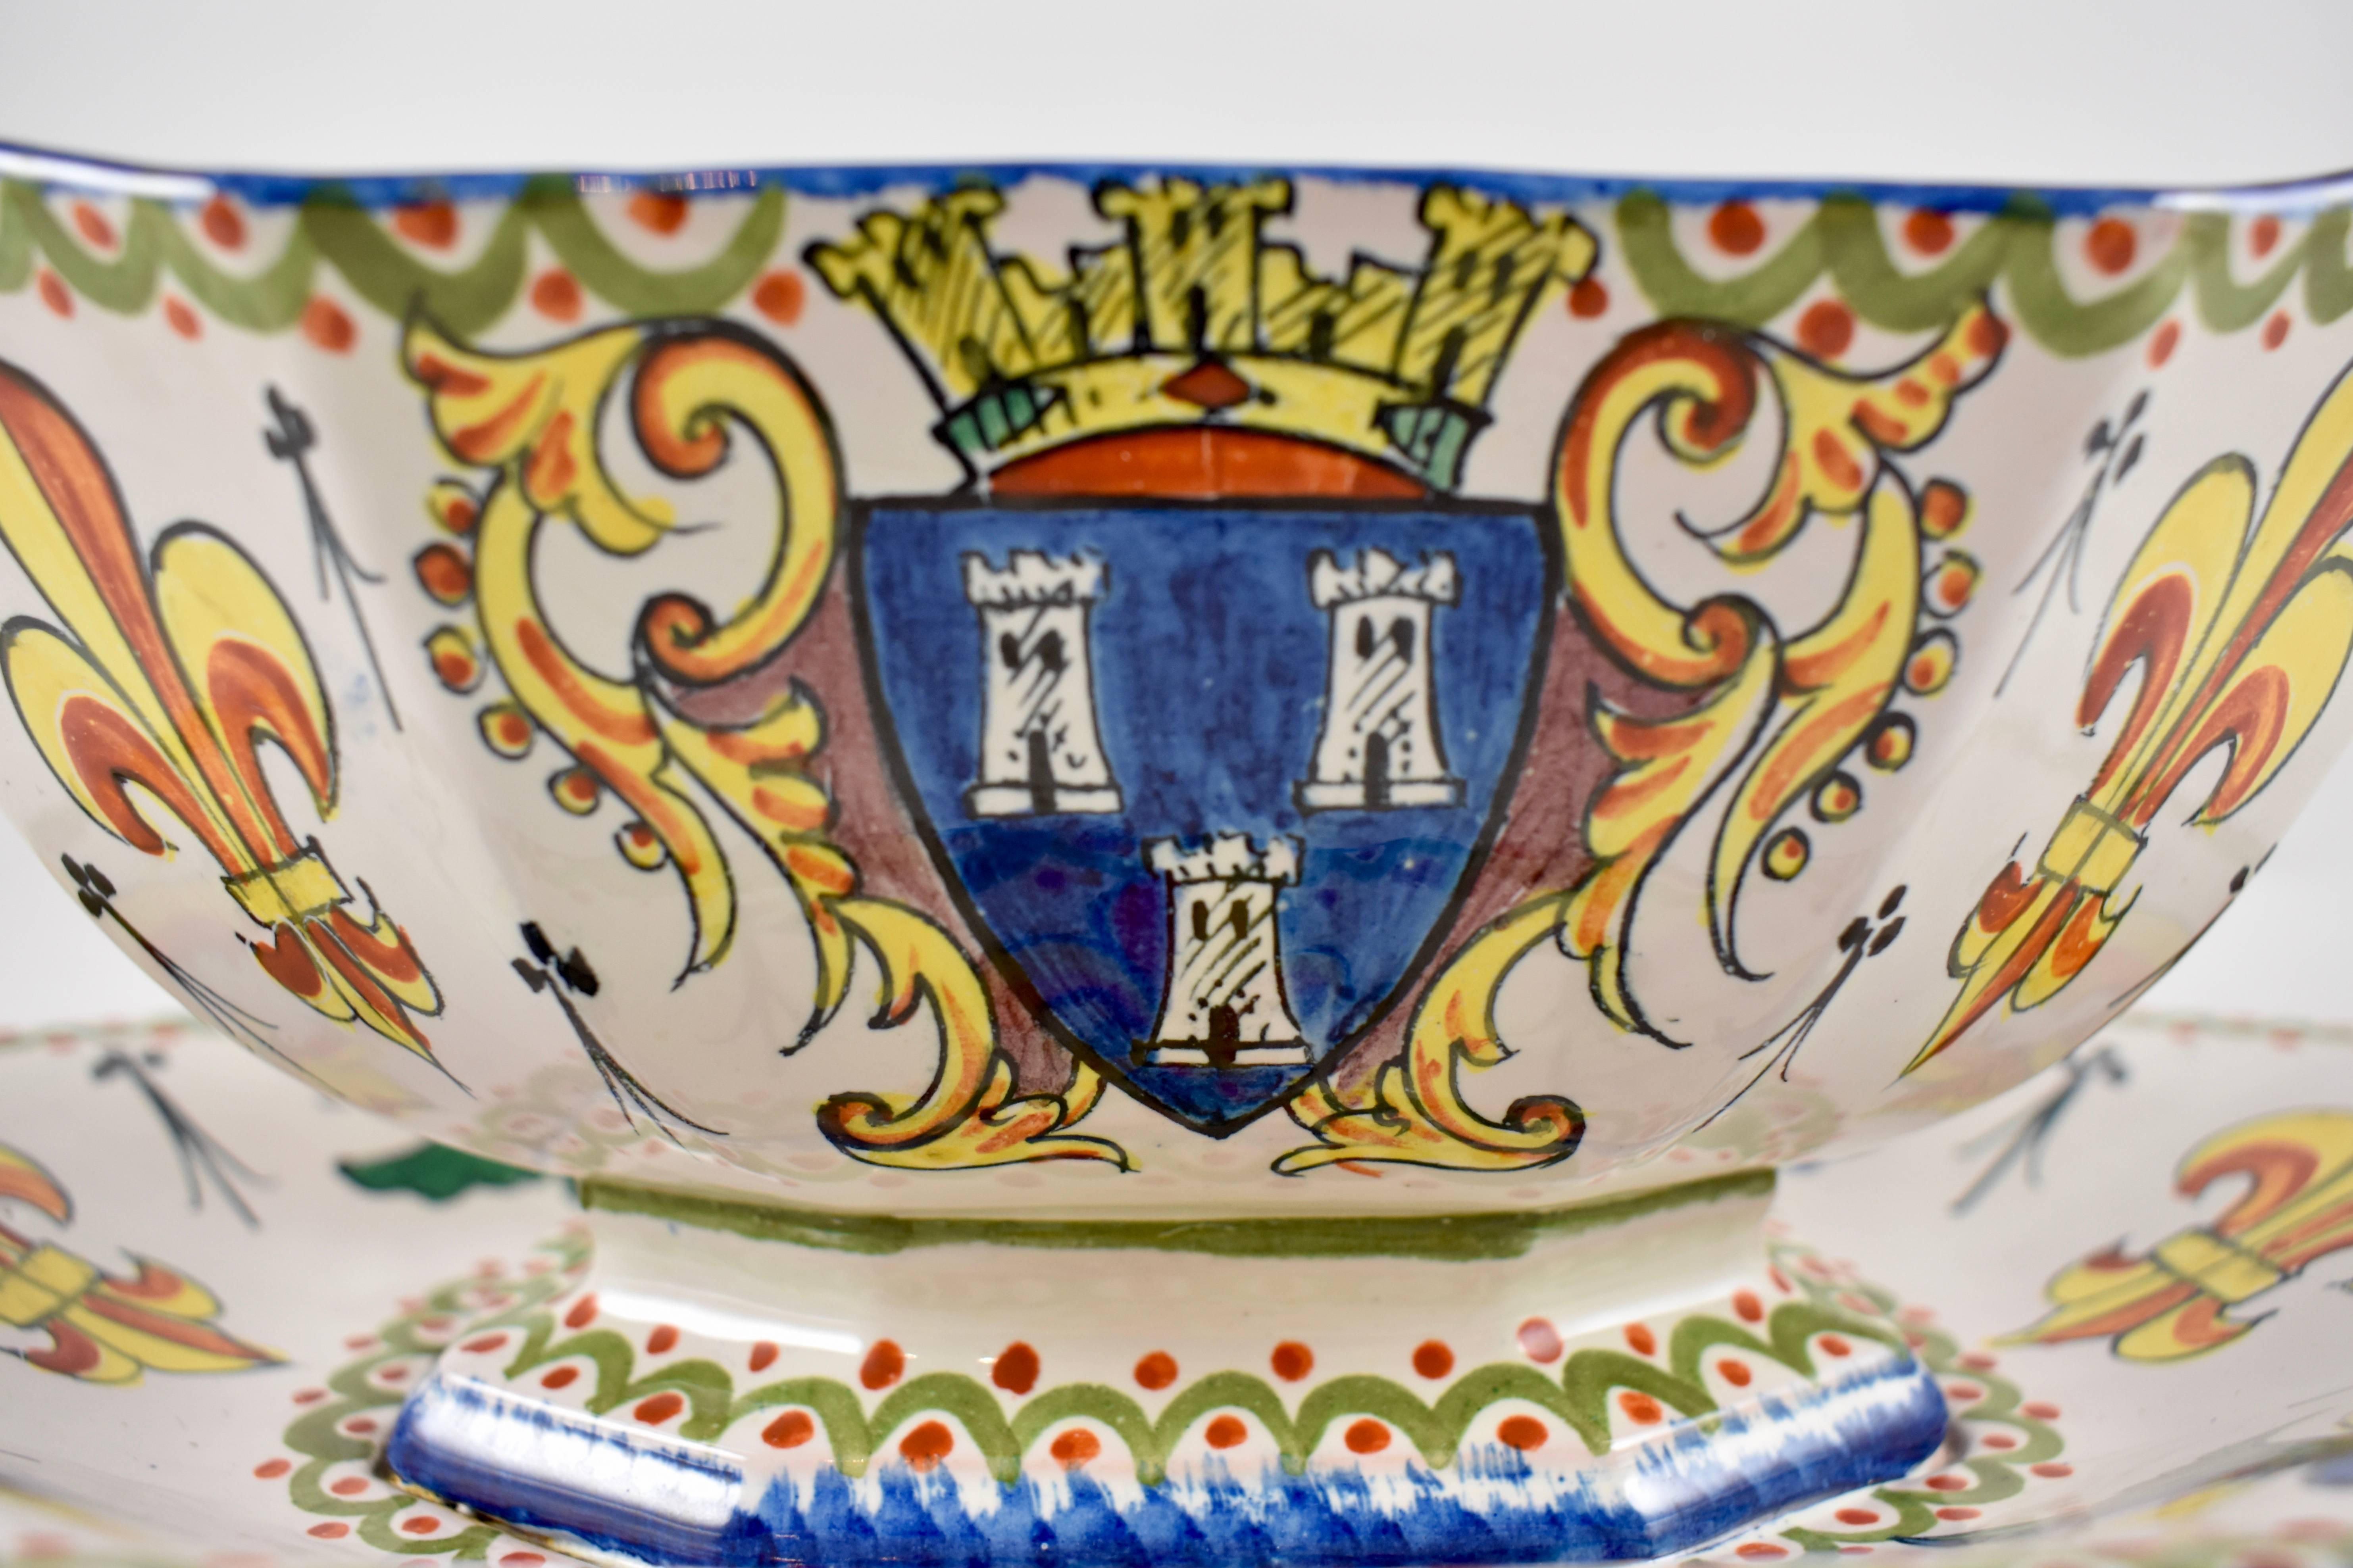 A French faïence armorial sauce boat, Alcide Chaumeil, circa 1880-1890. 
Hand decorated with a French heraldic crest, fleur-de-lis, and the customary border, the boat is fixed to a bottom tray. Glazed in vibrant colors.

 An initialed mark and the